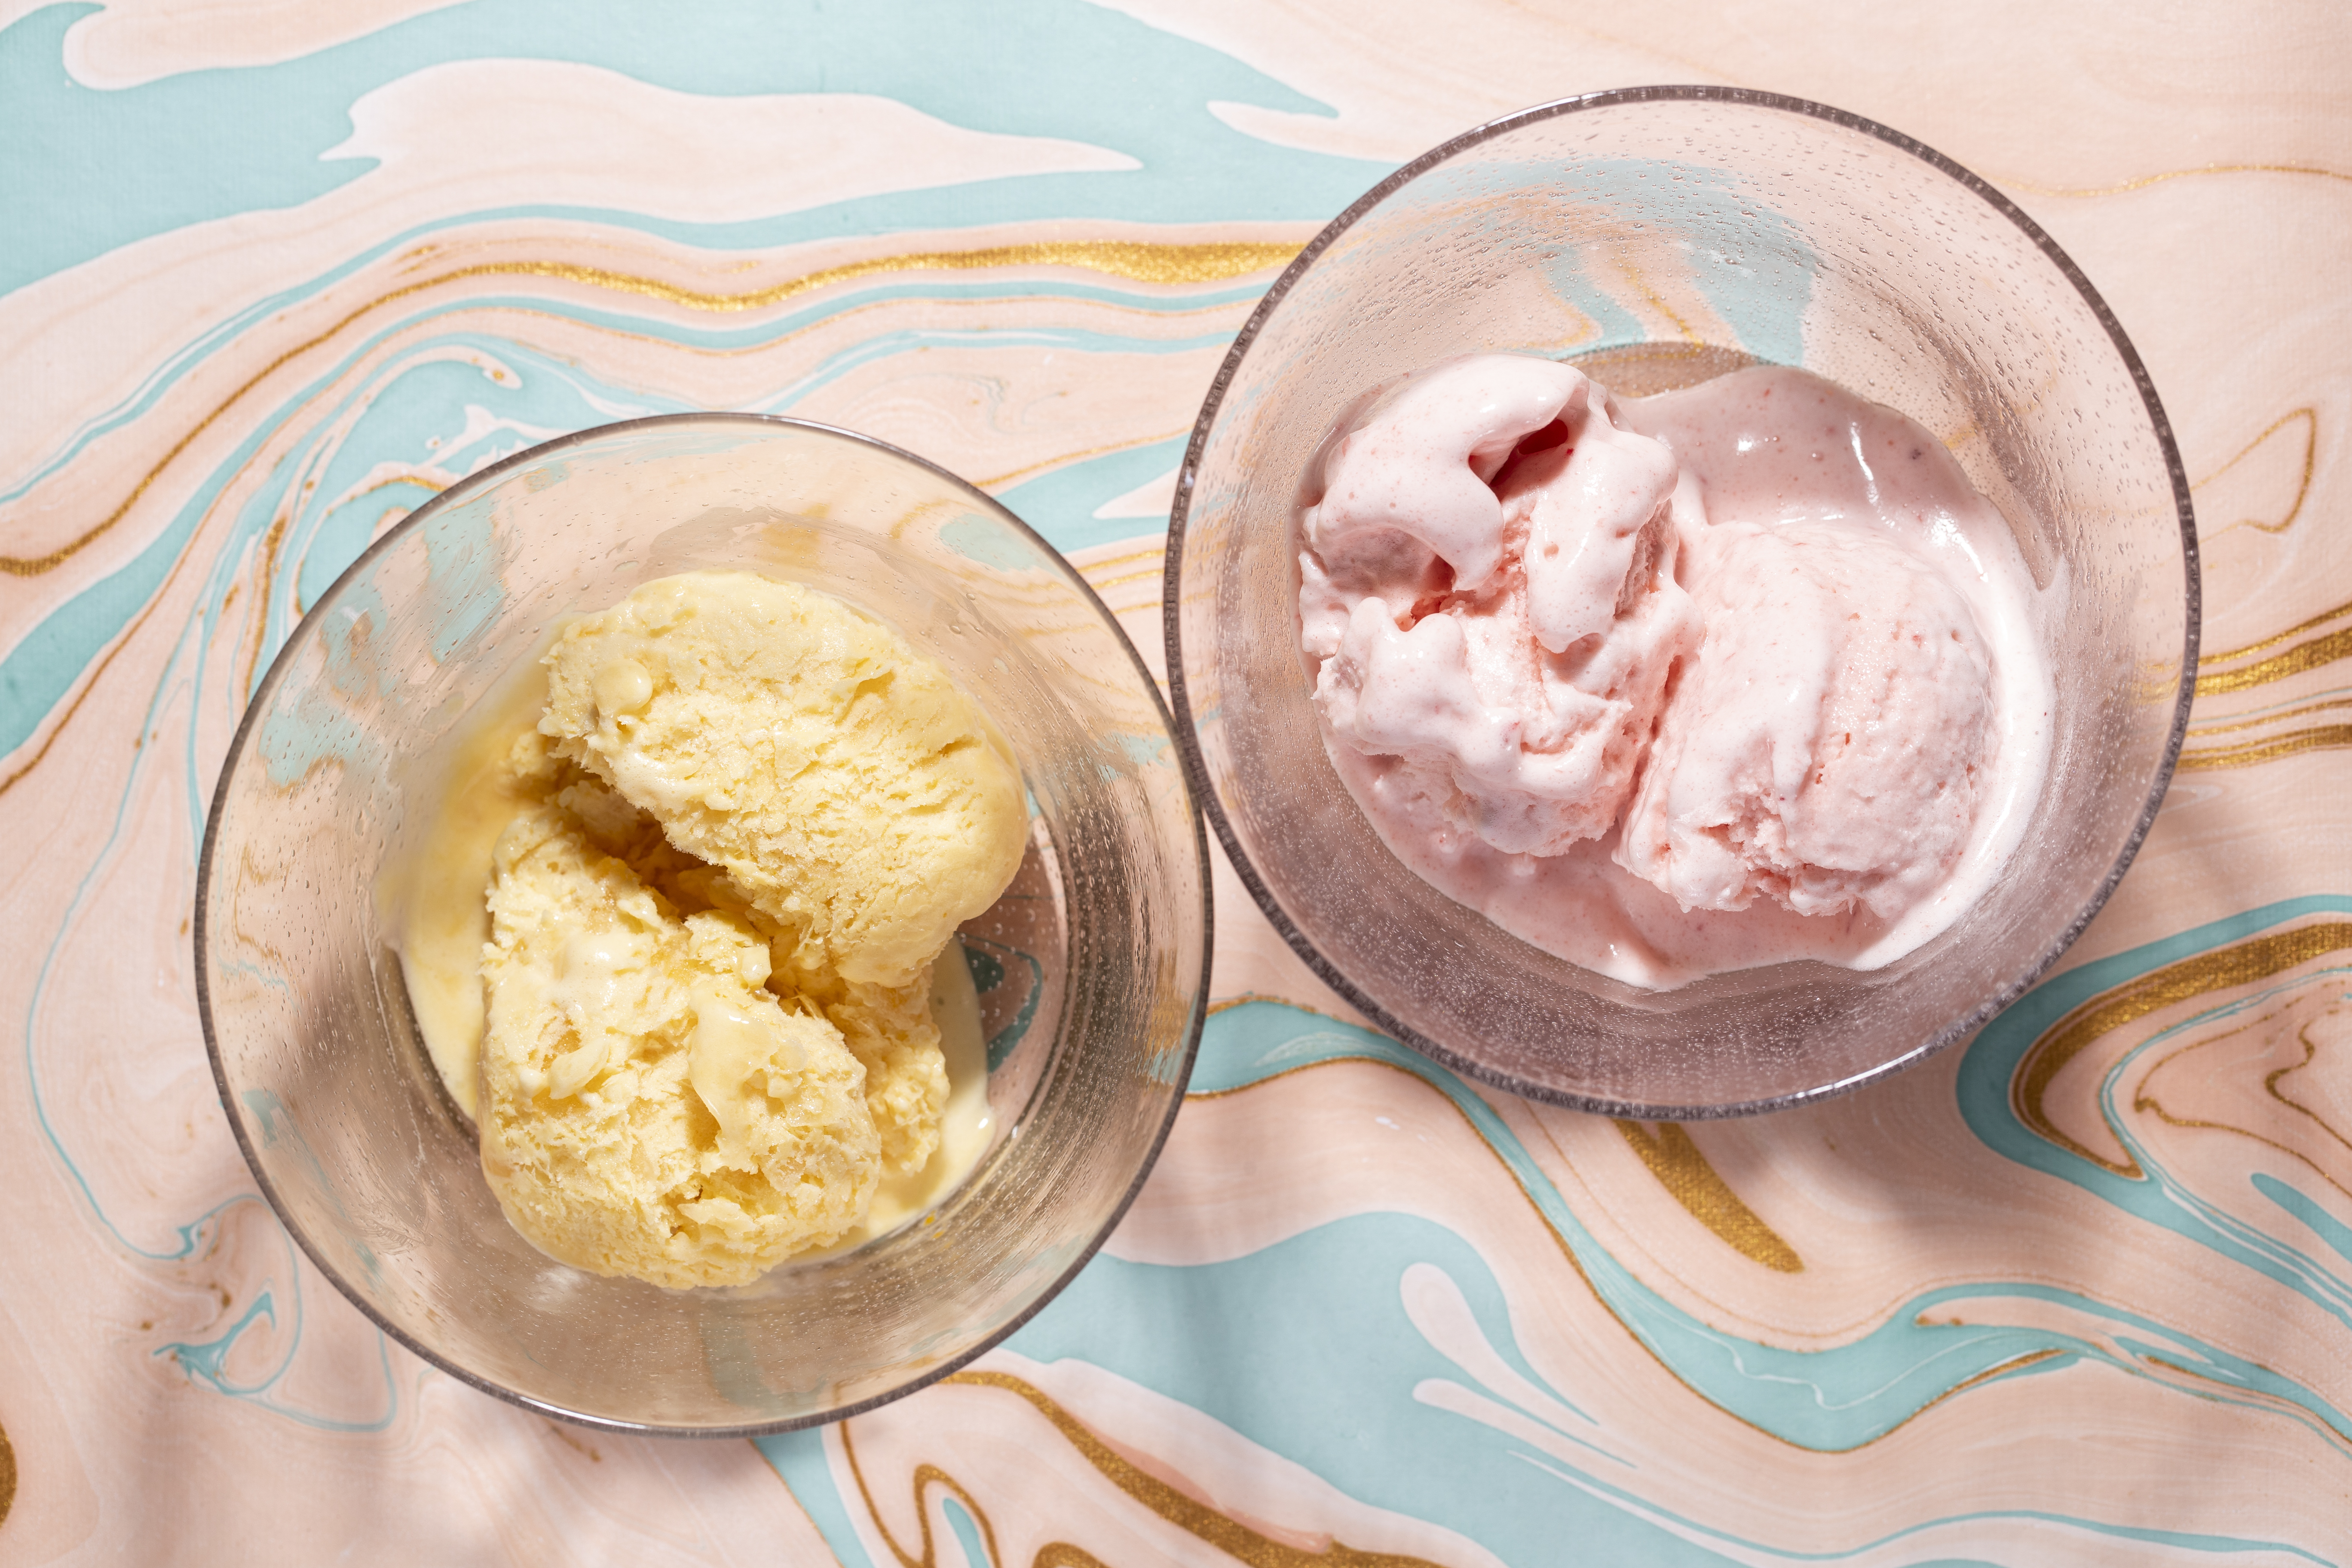 This 3-ingredient ice cream recipe comes together in less than 15 minutes